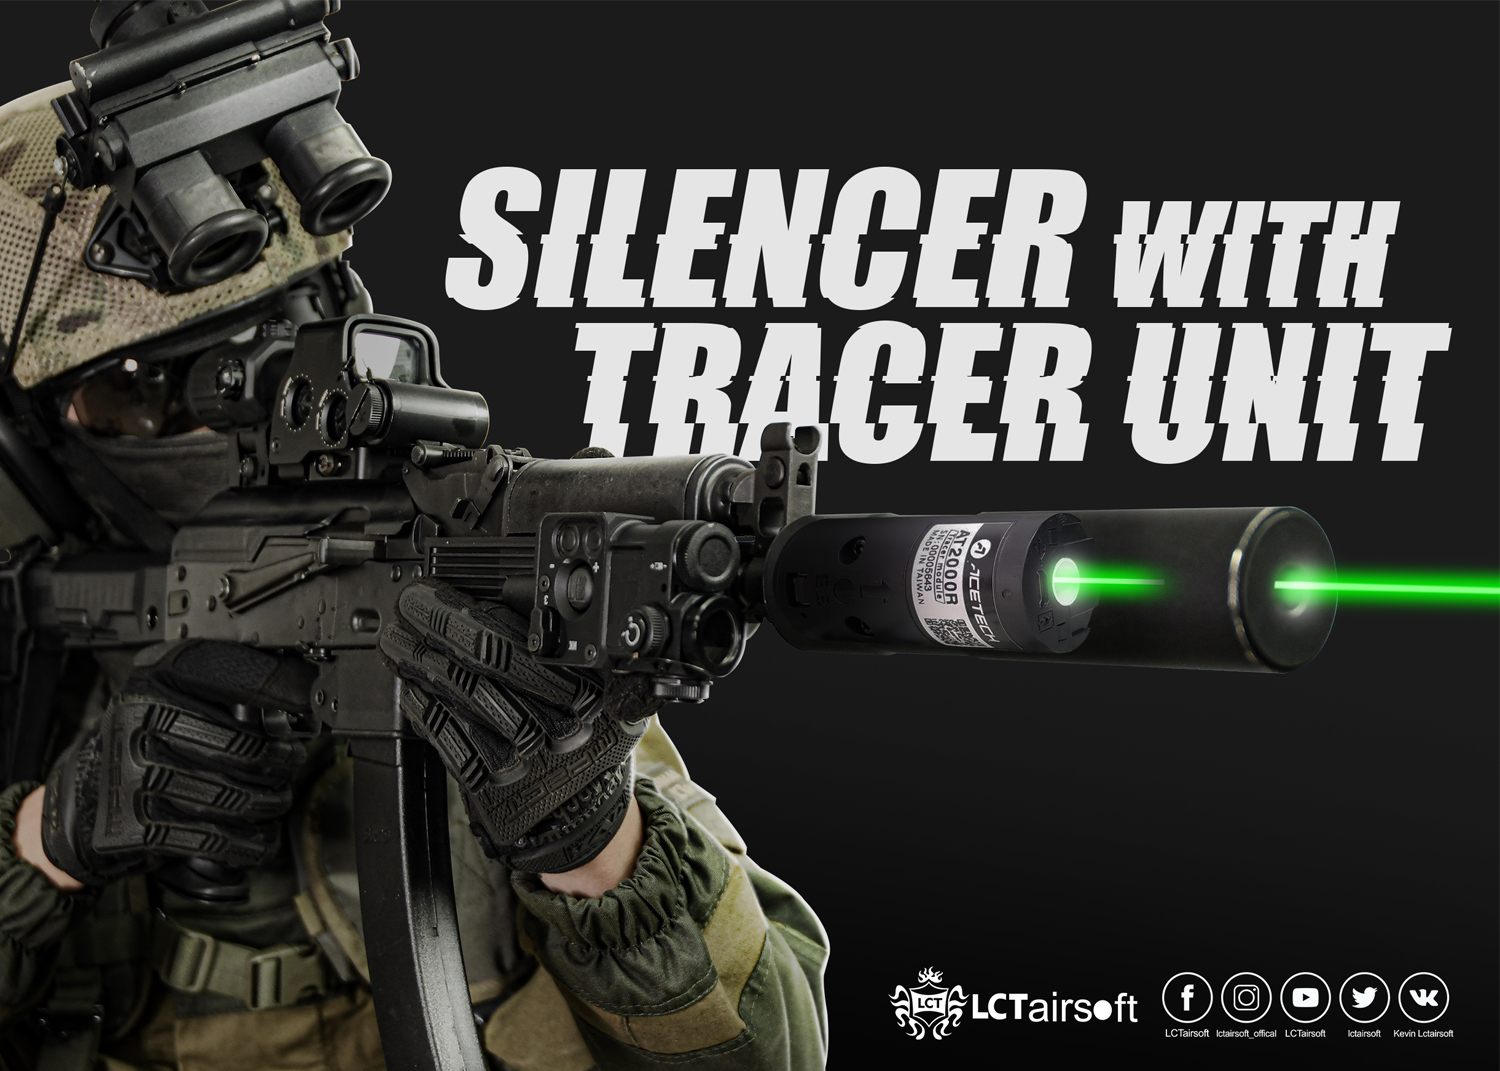 LCT Airsoft Silencers With Tracer Units